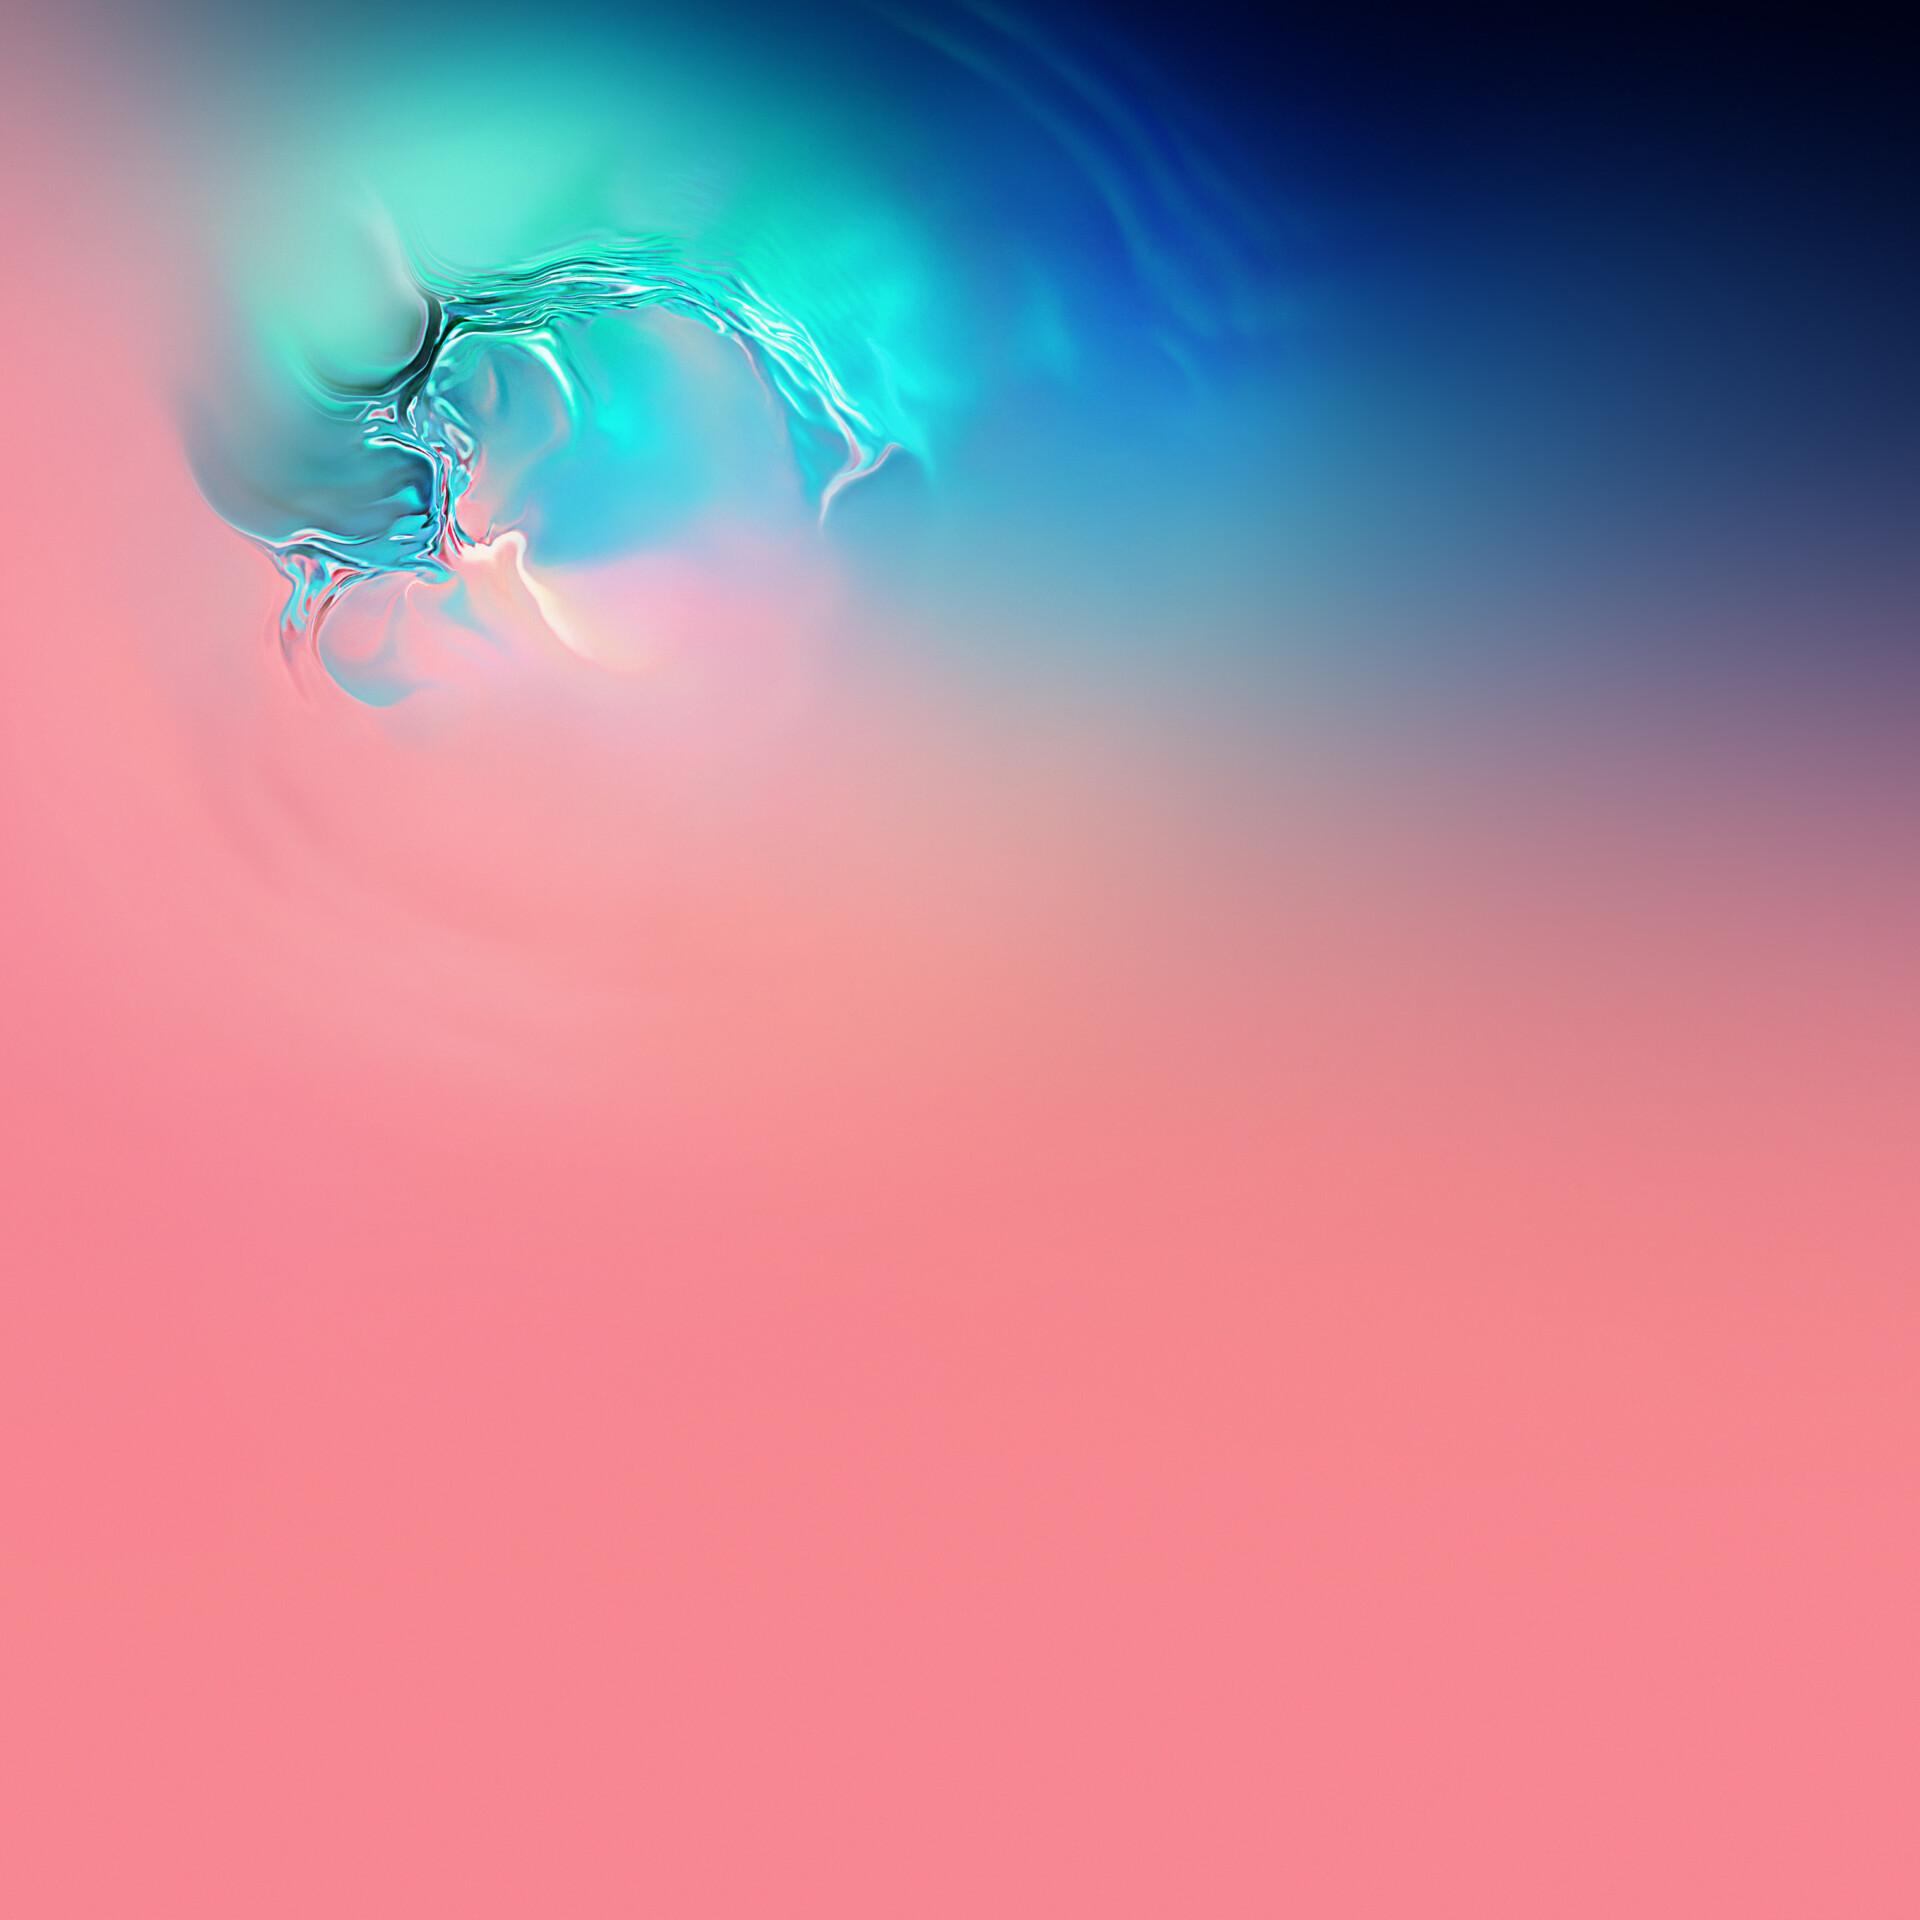 Samsung Galaxy S10 wallpaper are here: Grab them at full resolution